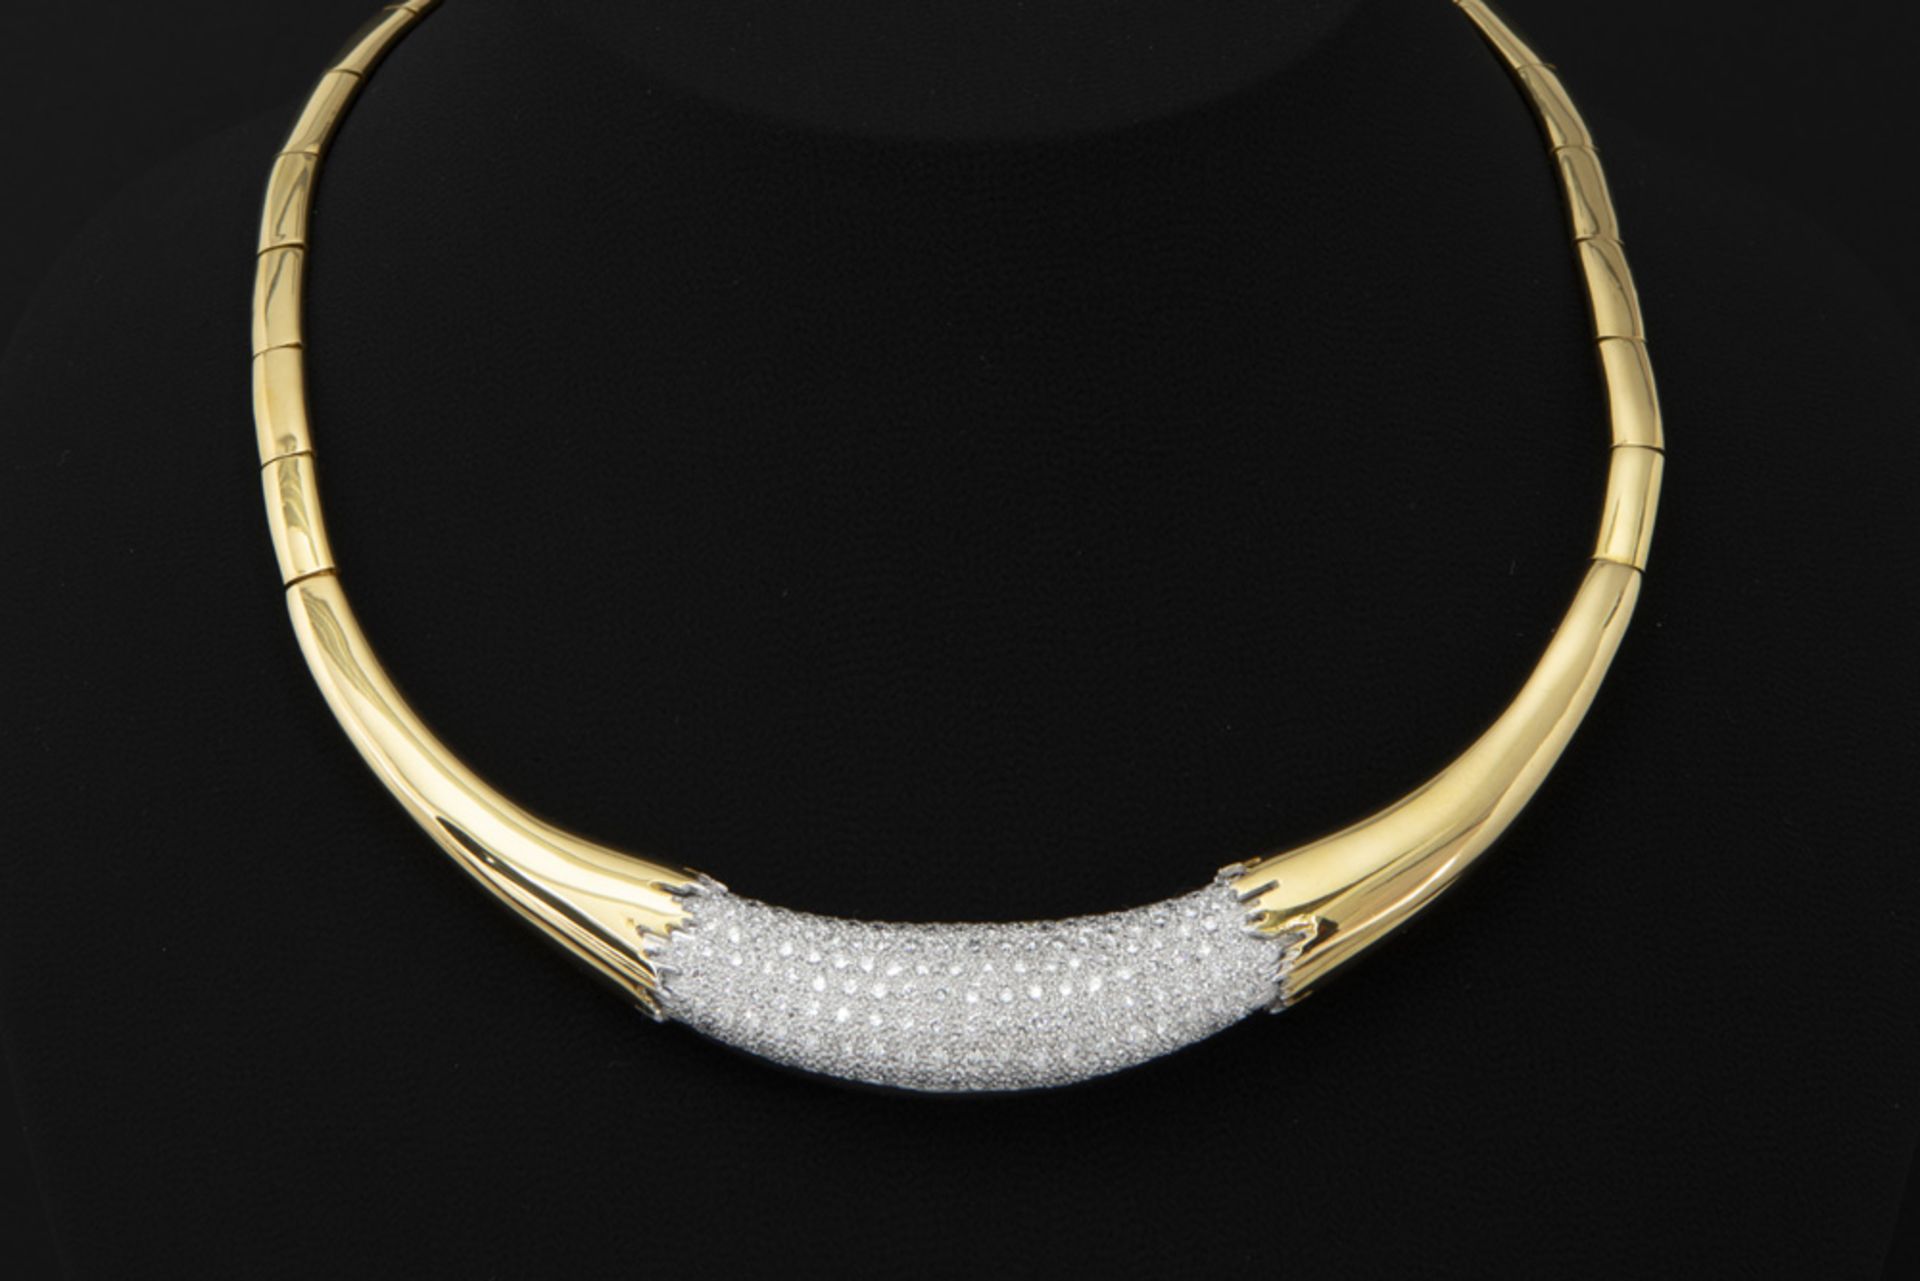 nineties design necklace in white and yellow gold (18 carat) with at least 3,50 carat of very high